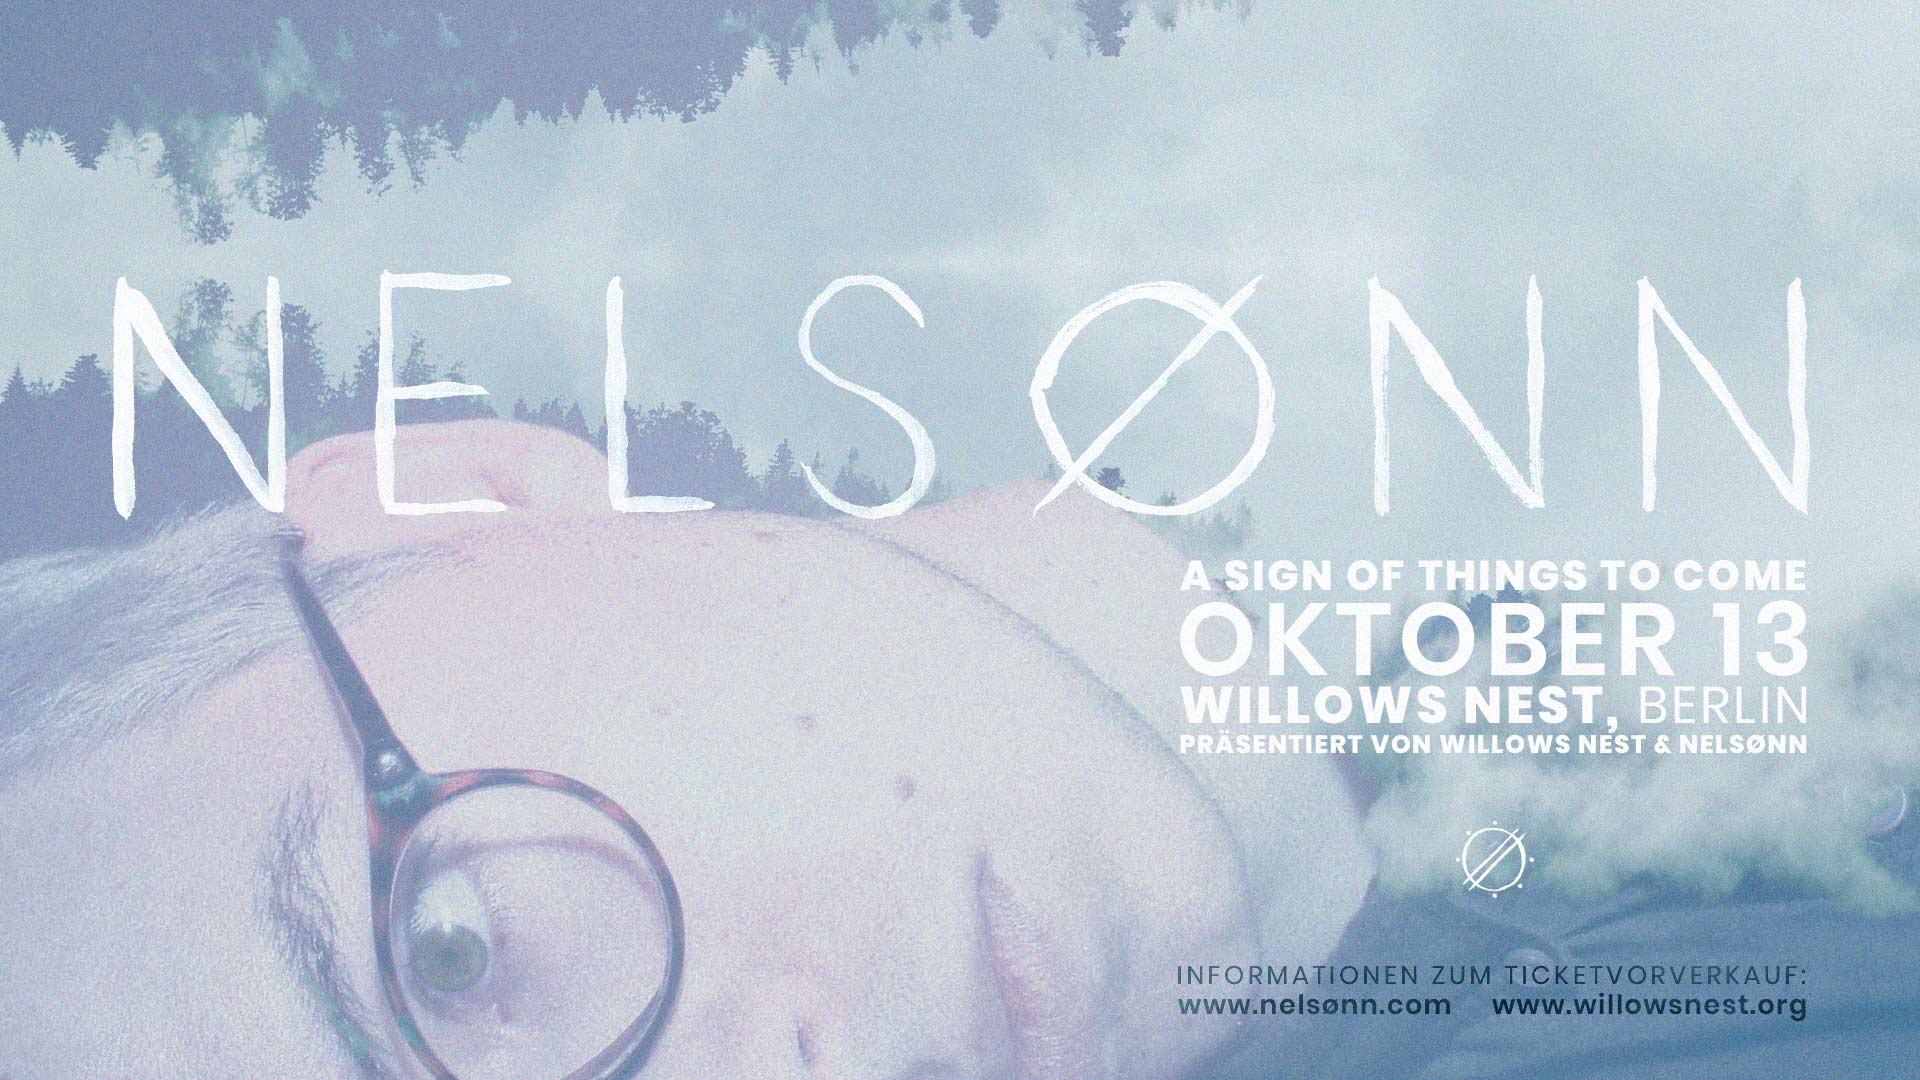 NELSØNN: A Sign of Things to Come